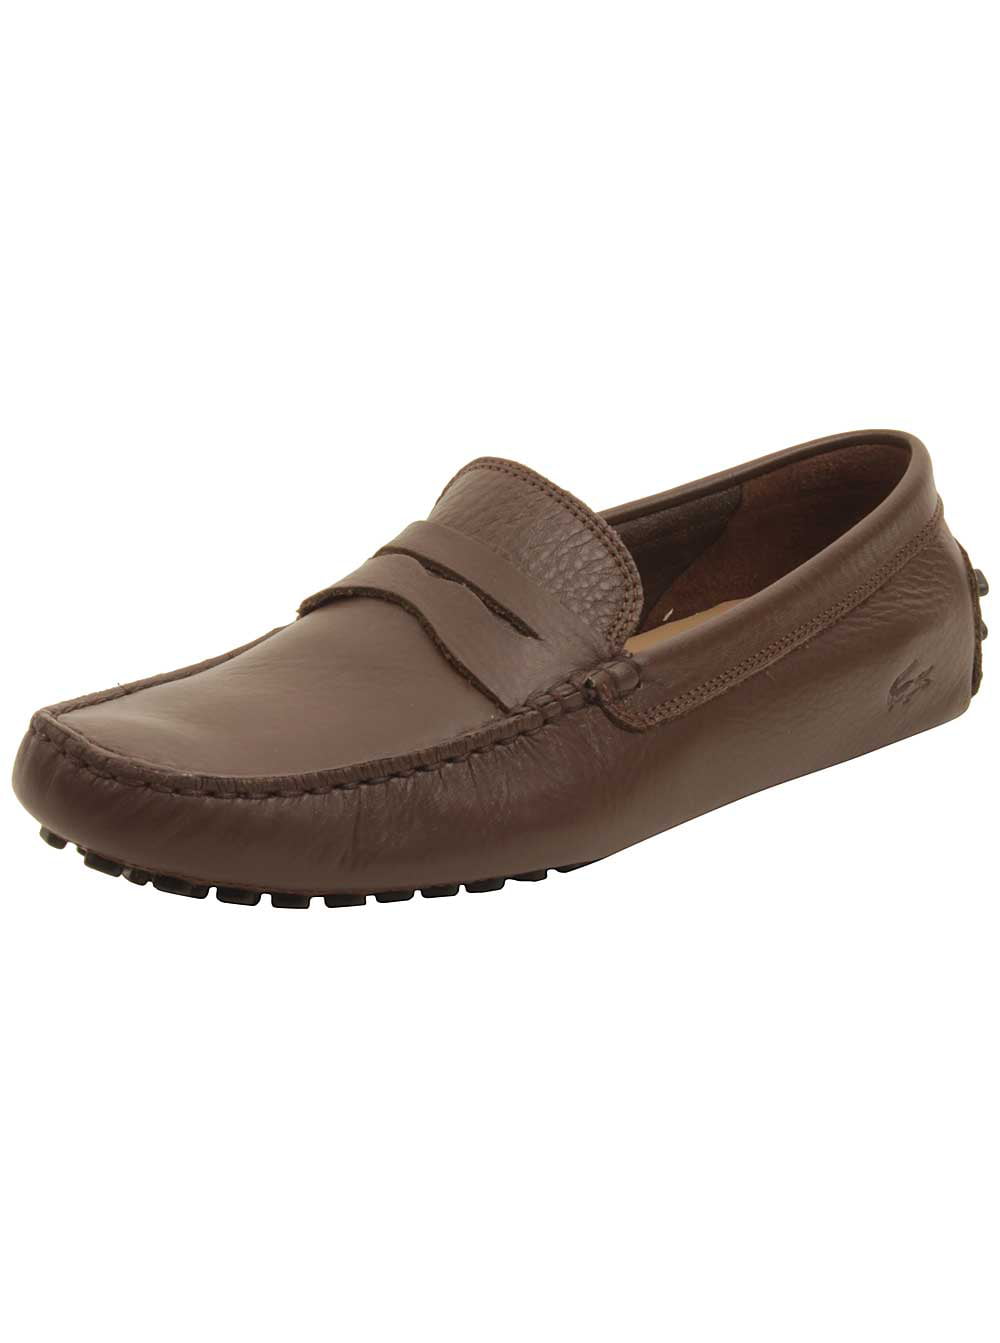 Lacoste Concours 118 1 Loafer Walmart.com